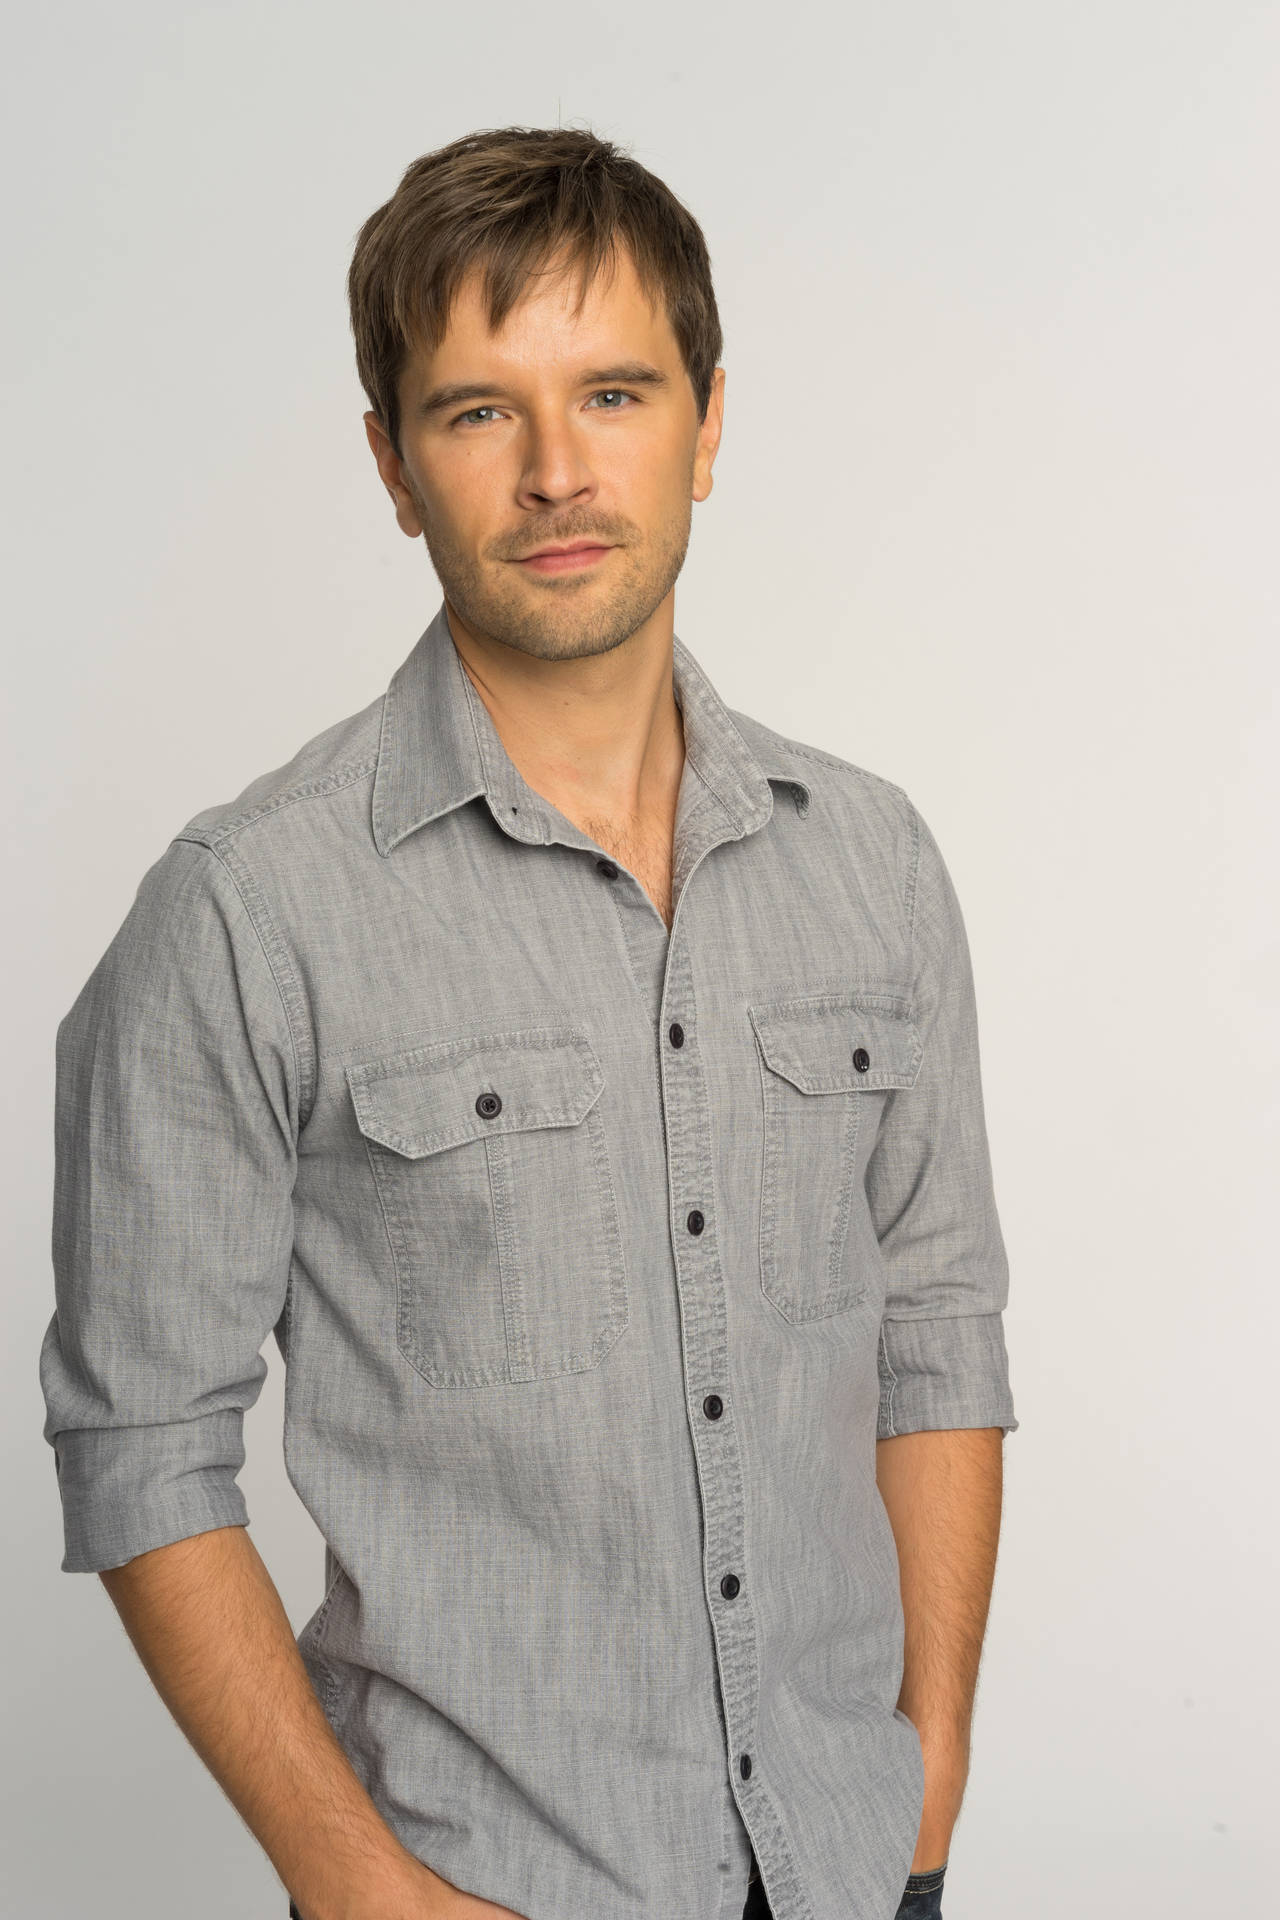 Canadian Actor Graham Wardle Posing For A Photo Shoot Background